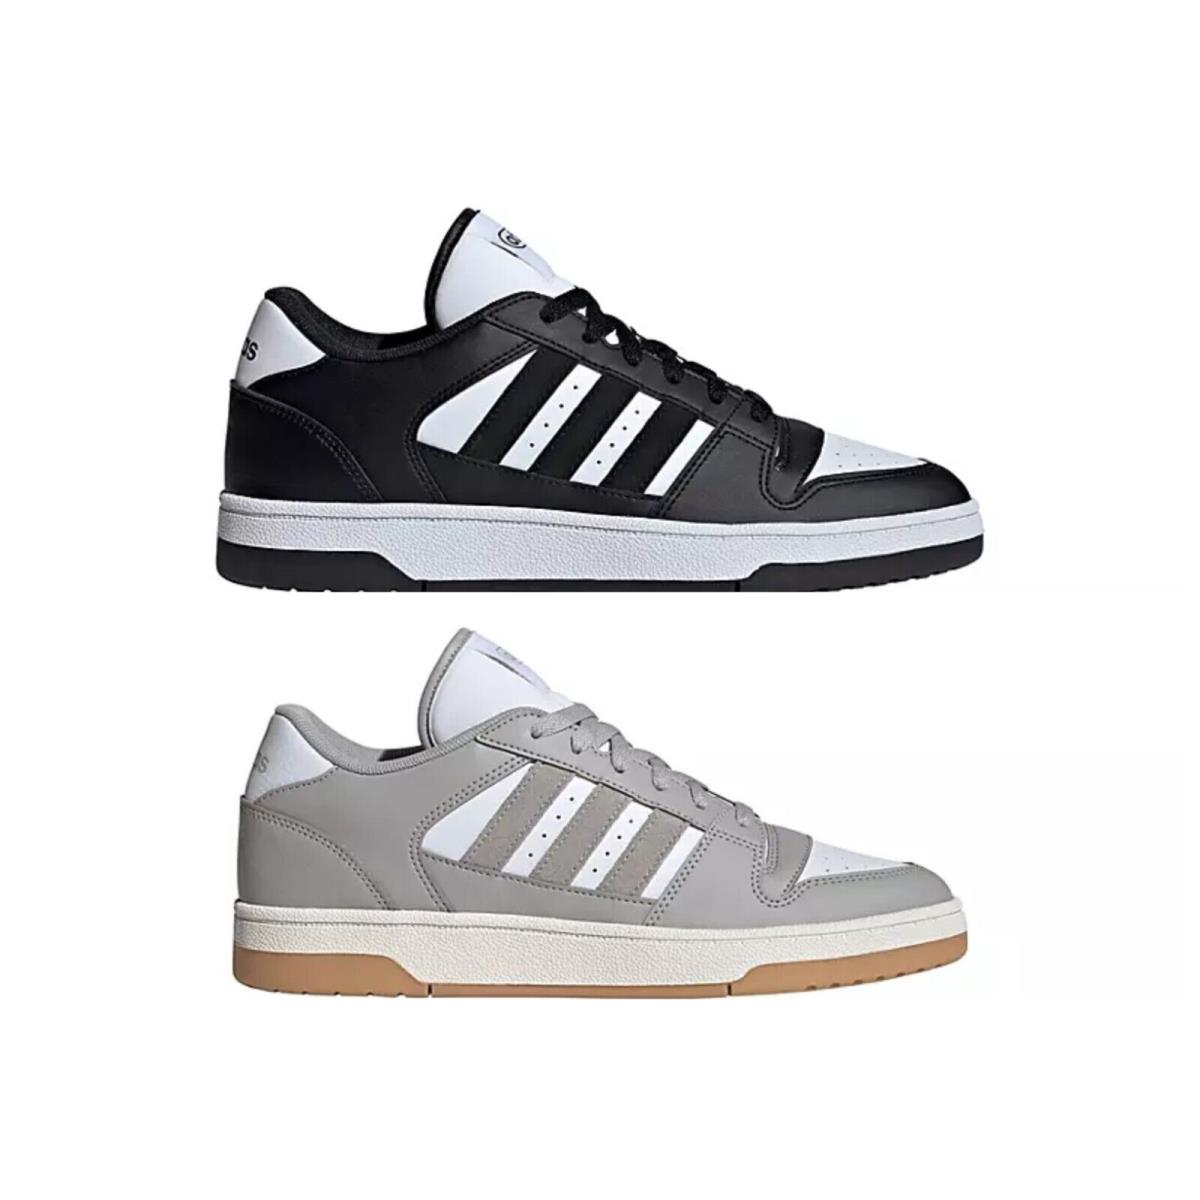 Adidas Mens Break Start Fashion and Daily Sneaker Shoes